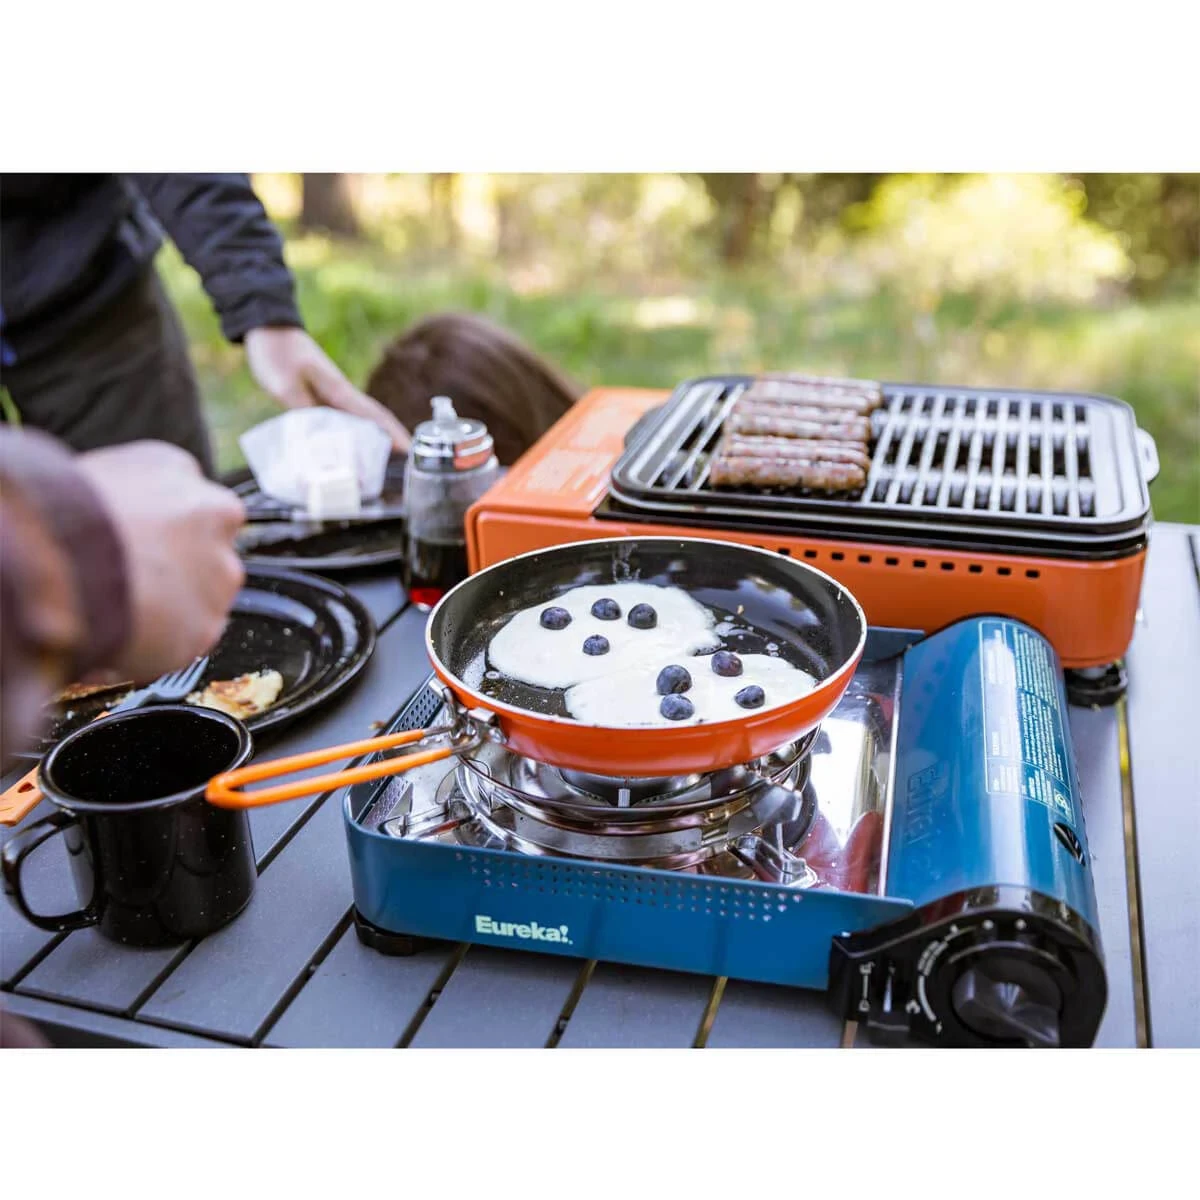 Cooking blueberry pancakes on the SPRK⁺ Camp Stove™